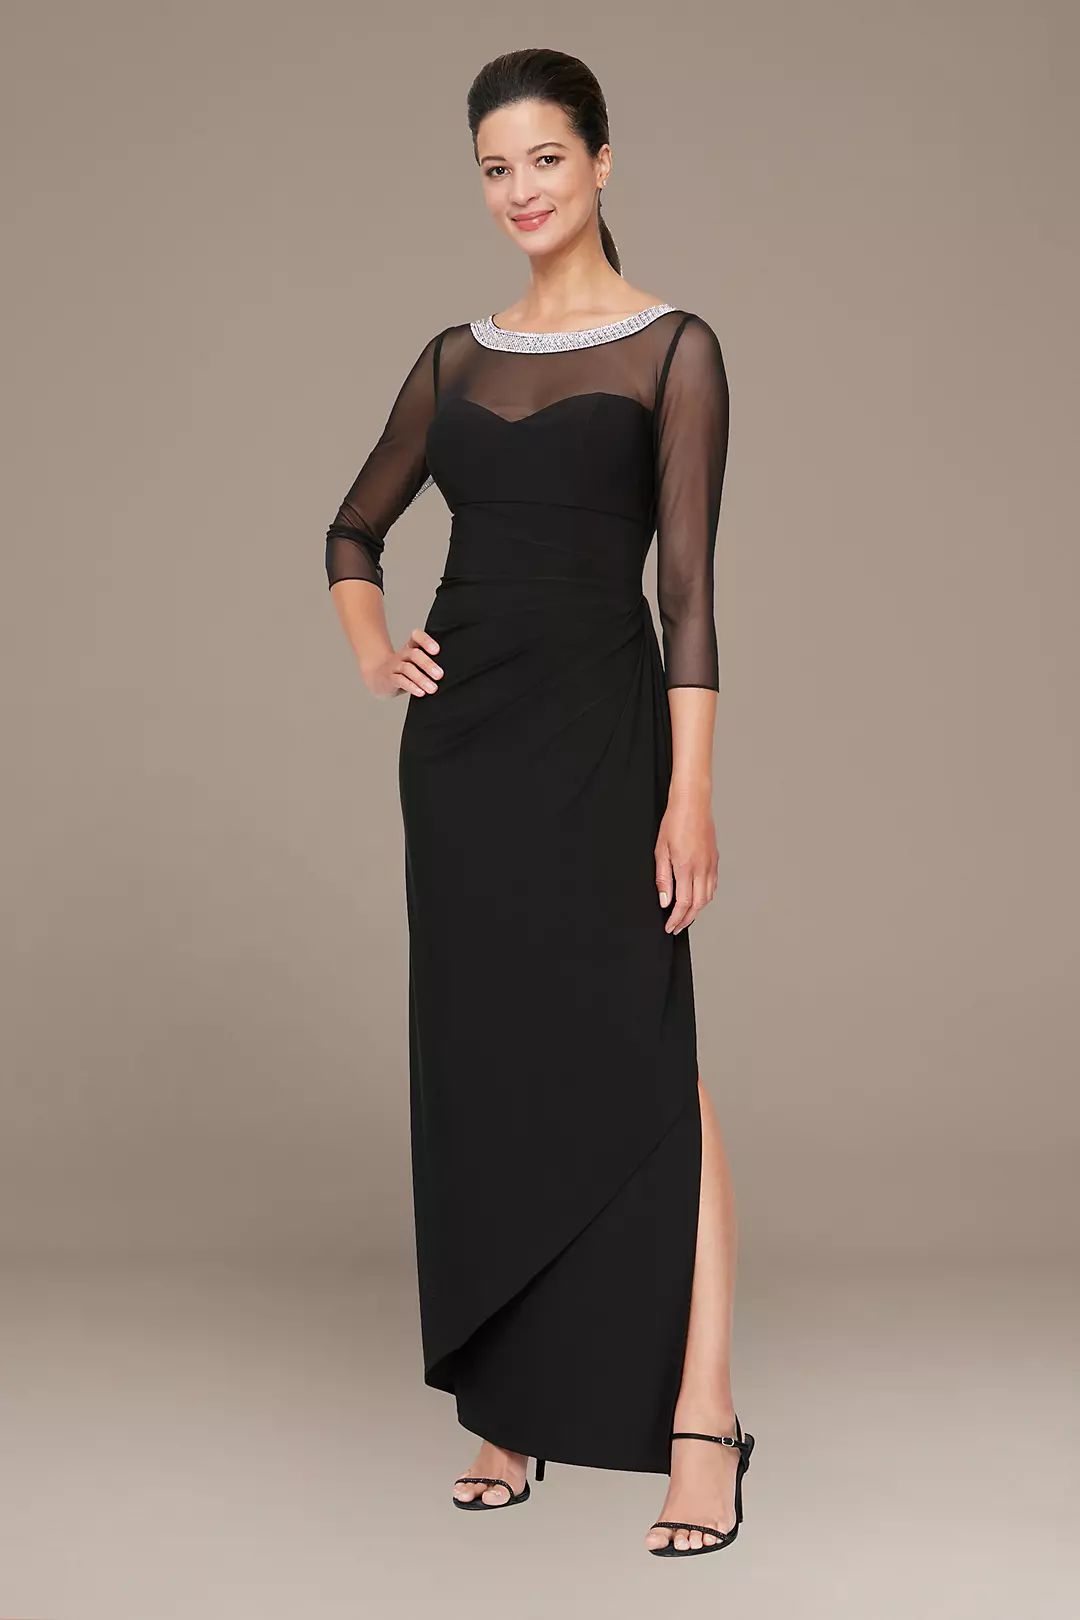 Petite Ruched Sheath with Beaded Illusion Neckline Image